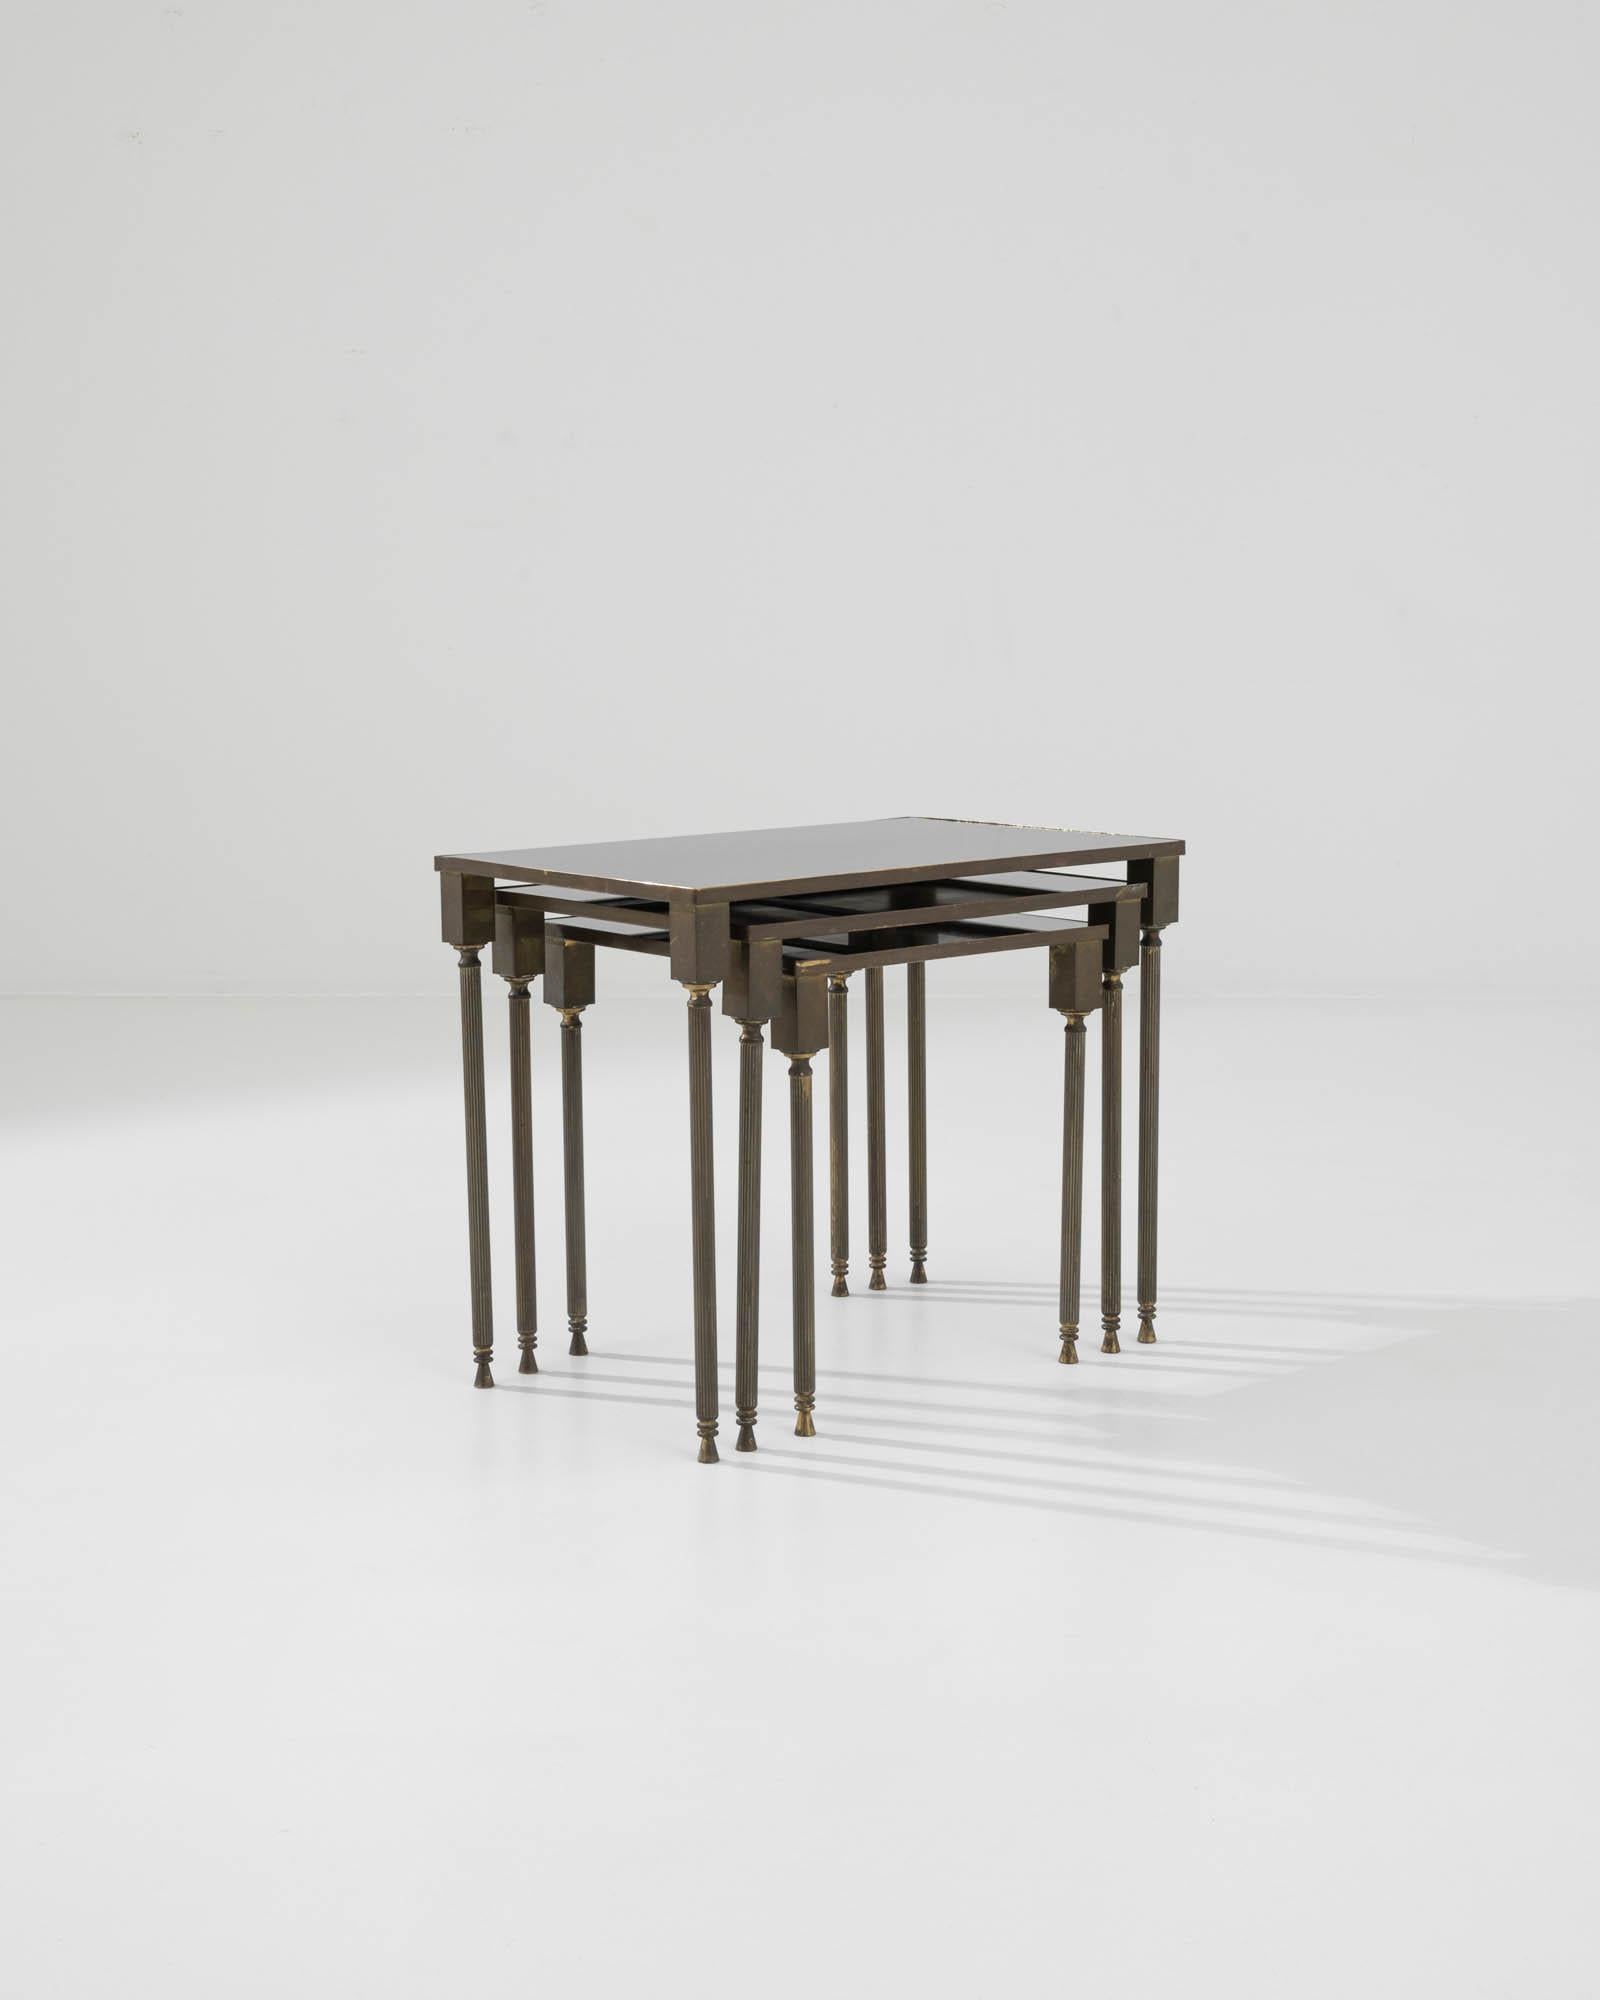 This trio of nesting tables provides a sophisticated accent. Made in France in the 1960s, a gilded brass base, gold-colored legs, and darkly tinted glass form a pleasing color palette. The geometric legs give a modern inflection to the Neo-classical